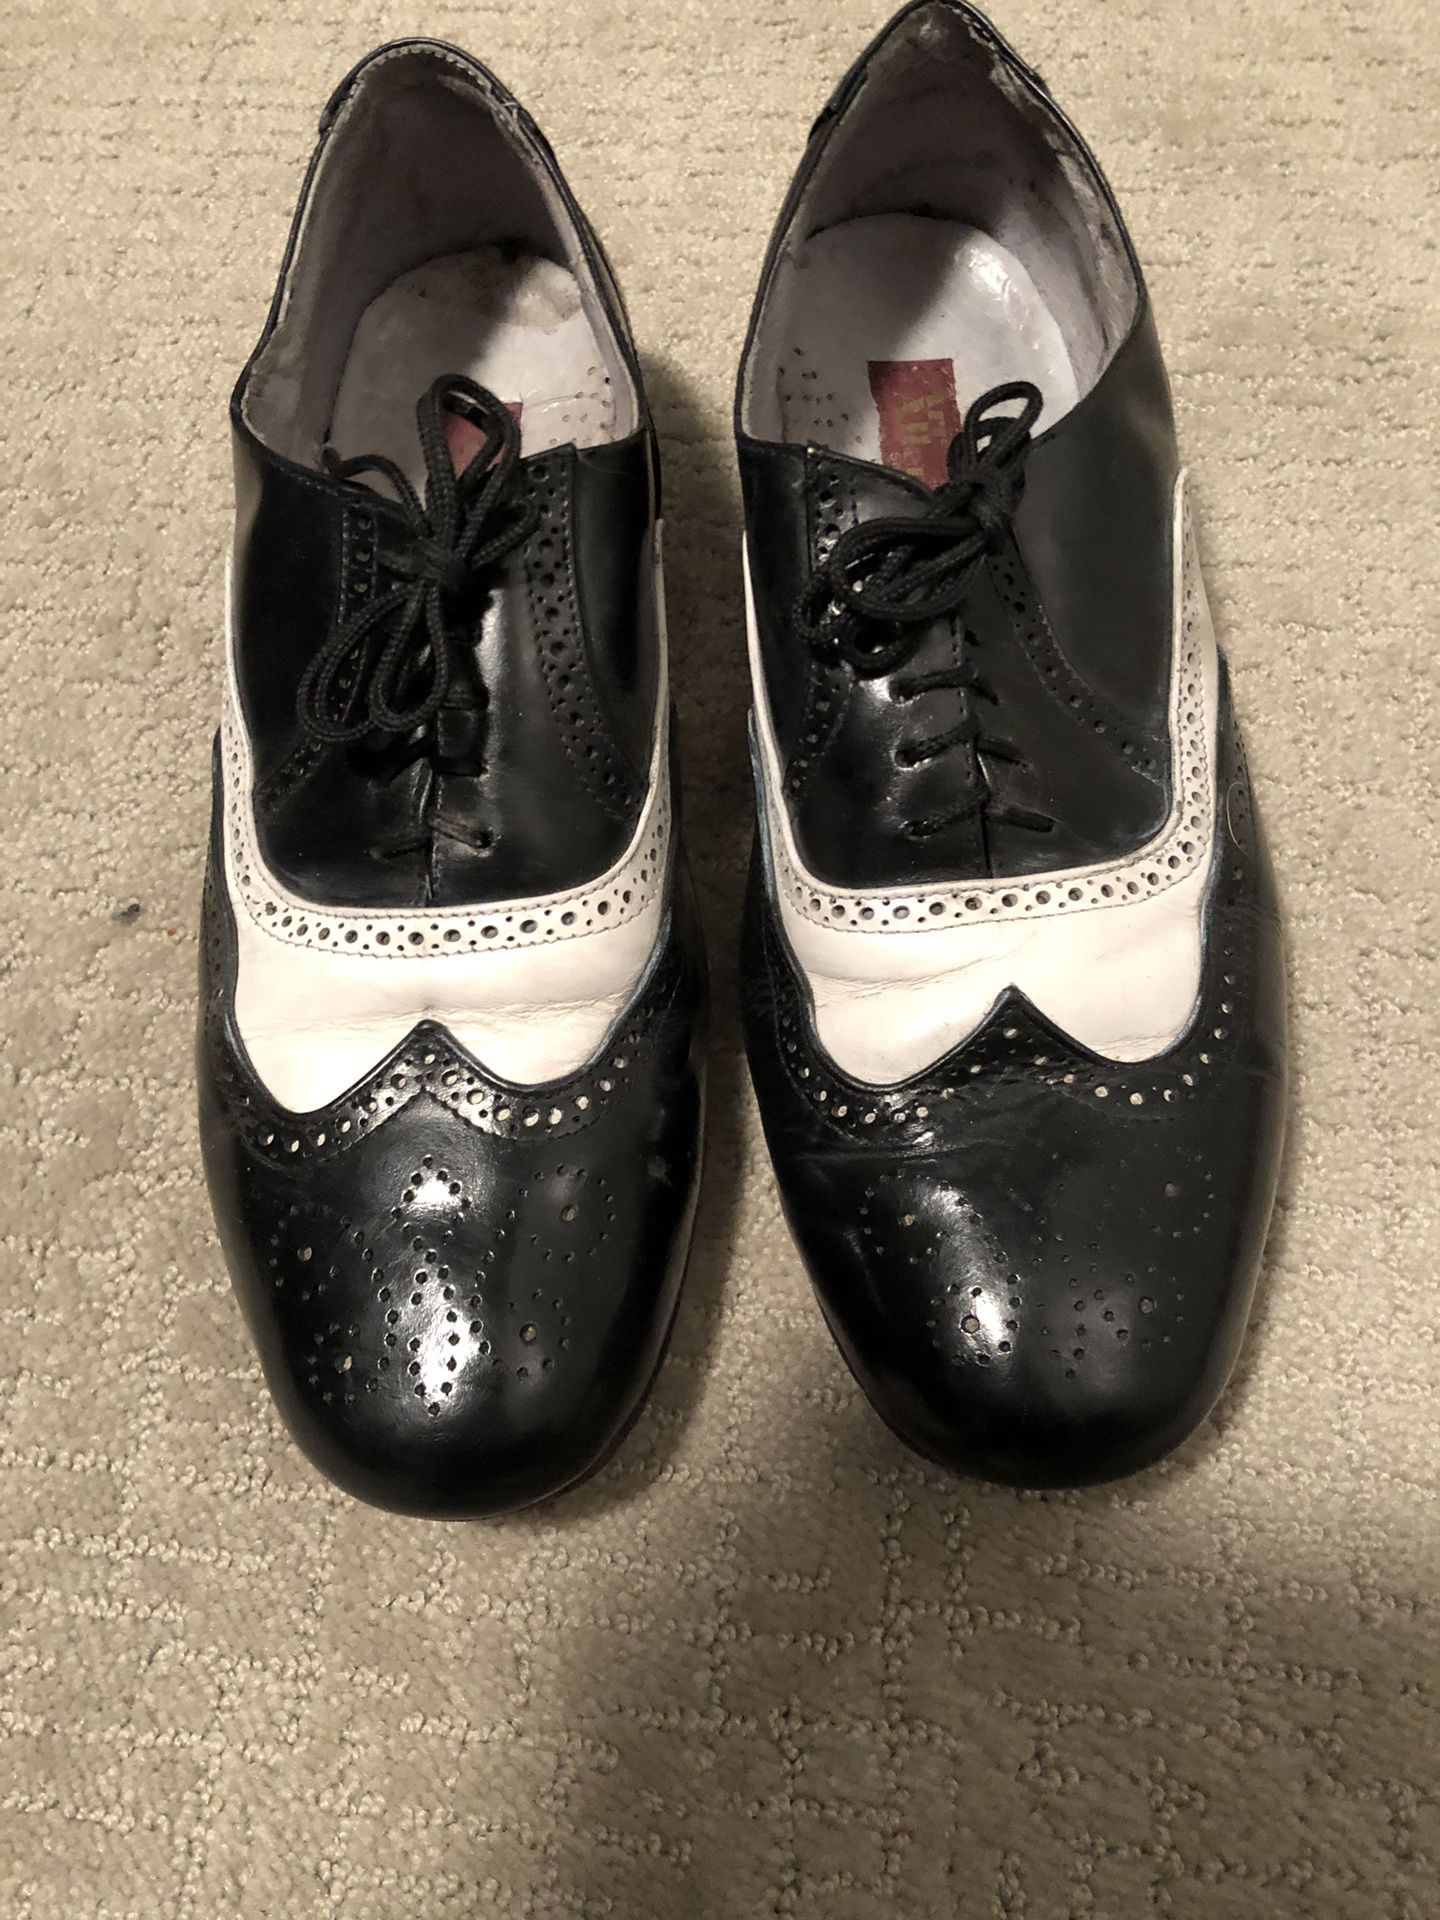 Men’s brogue/wing tips size 7